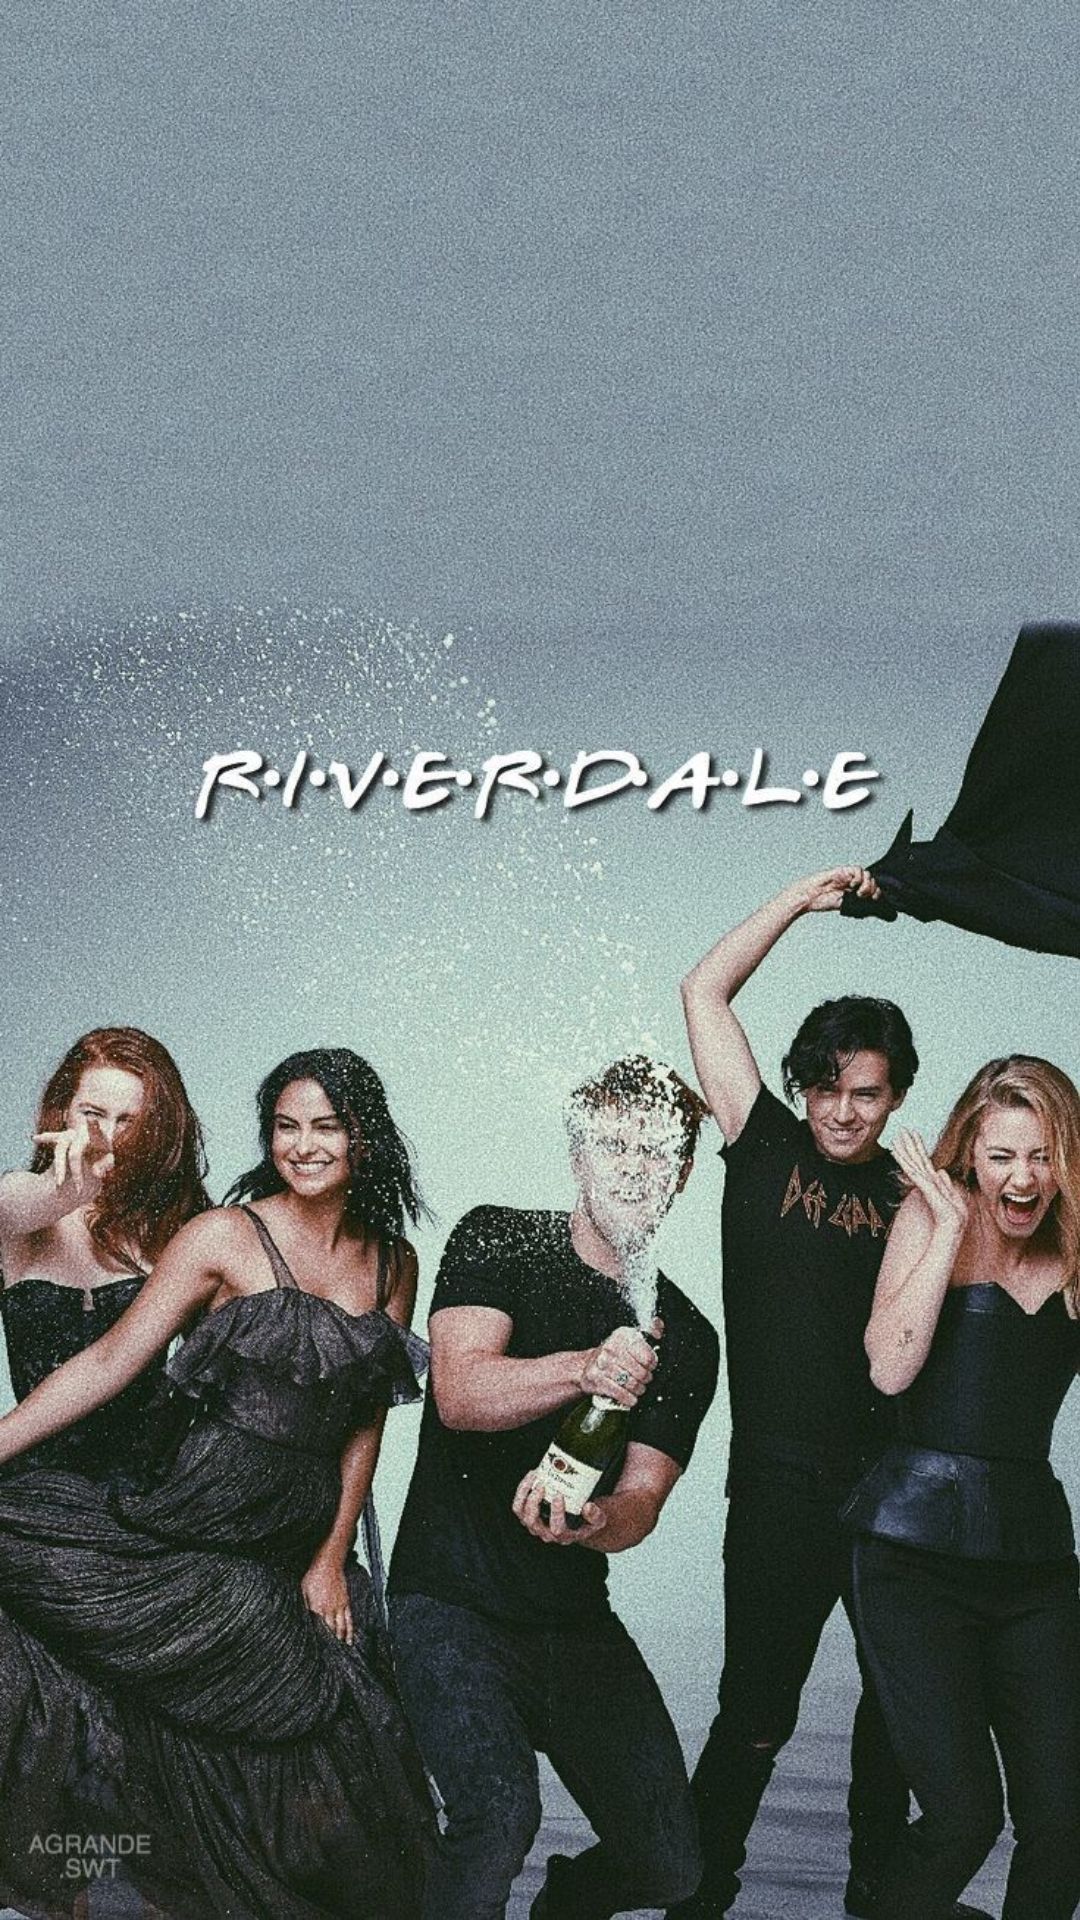 A group of people standing together in front - Riverdale